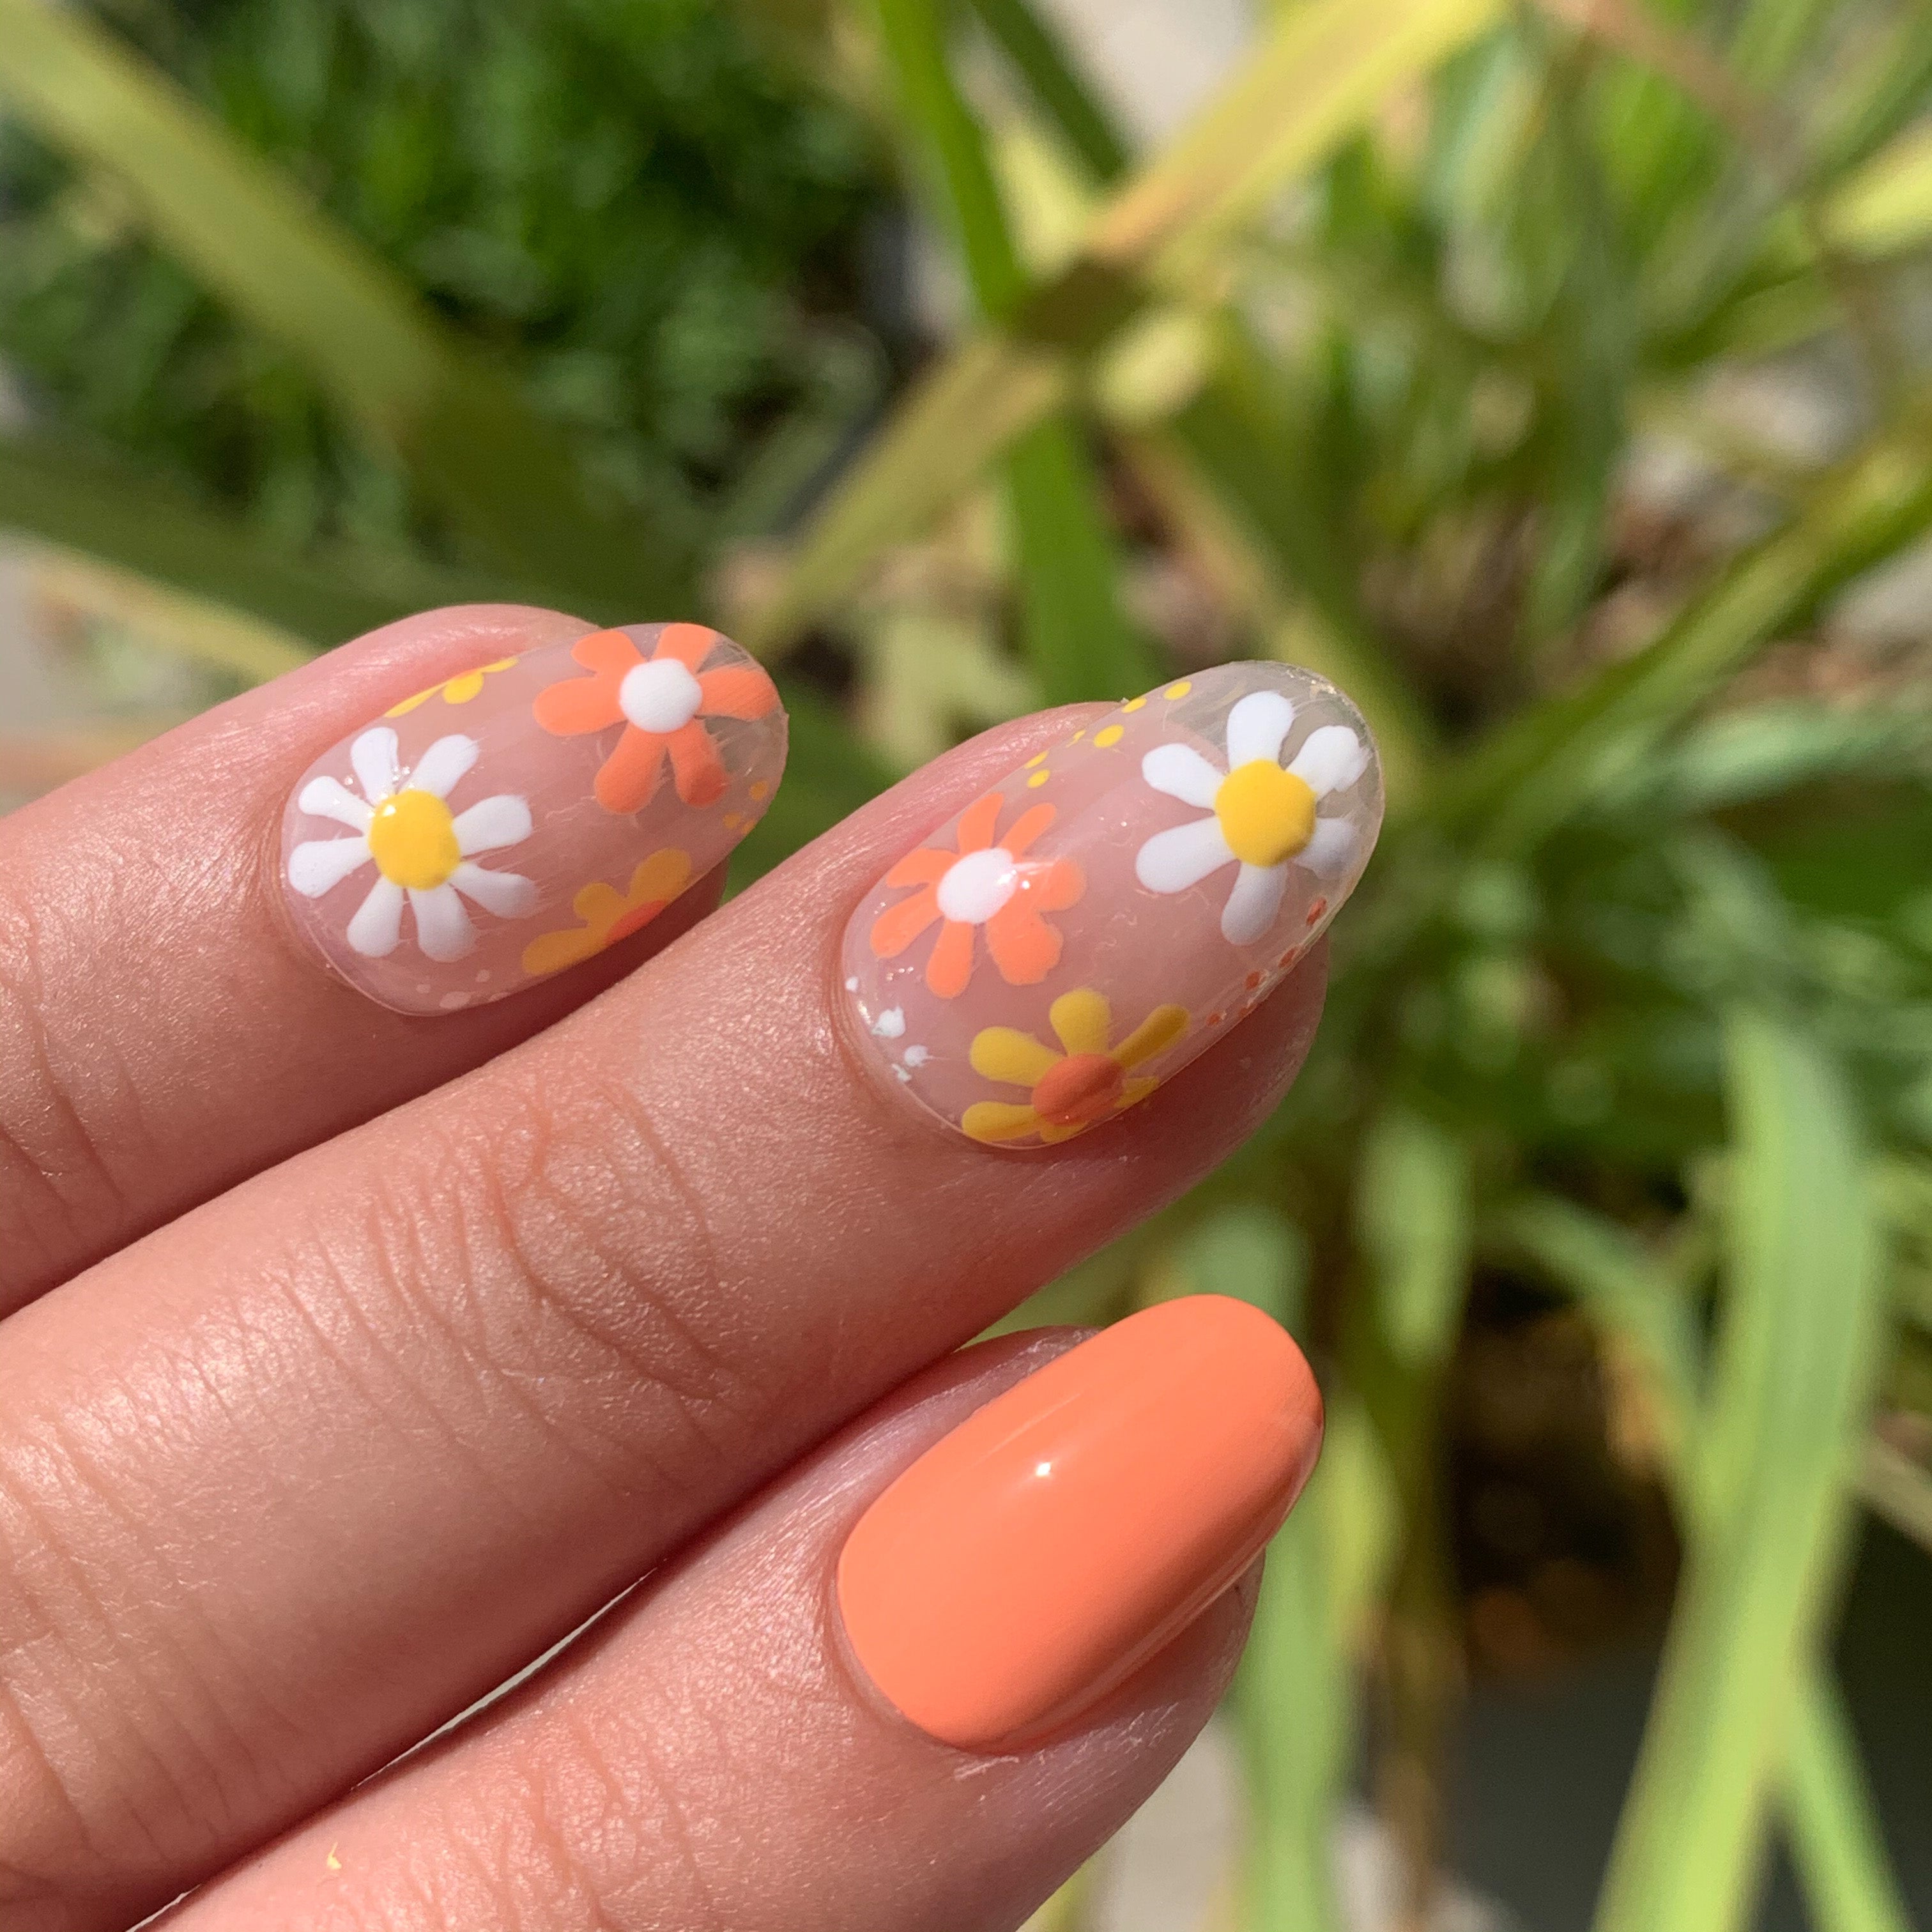 nail art step by step flowers